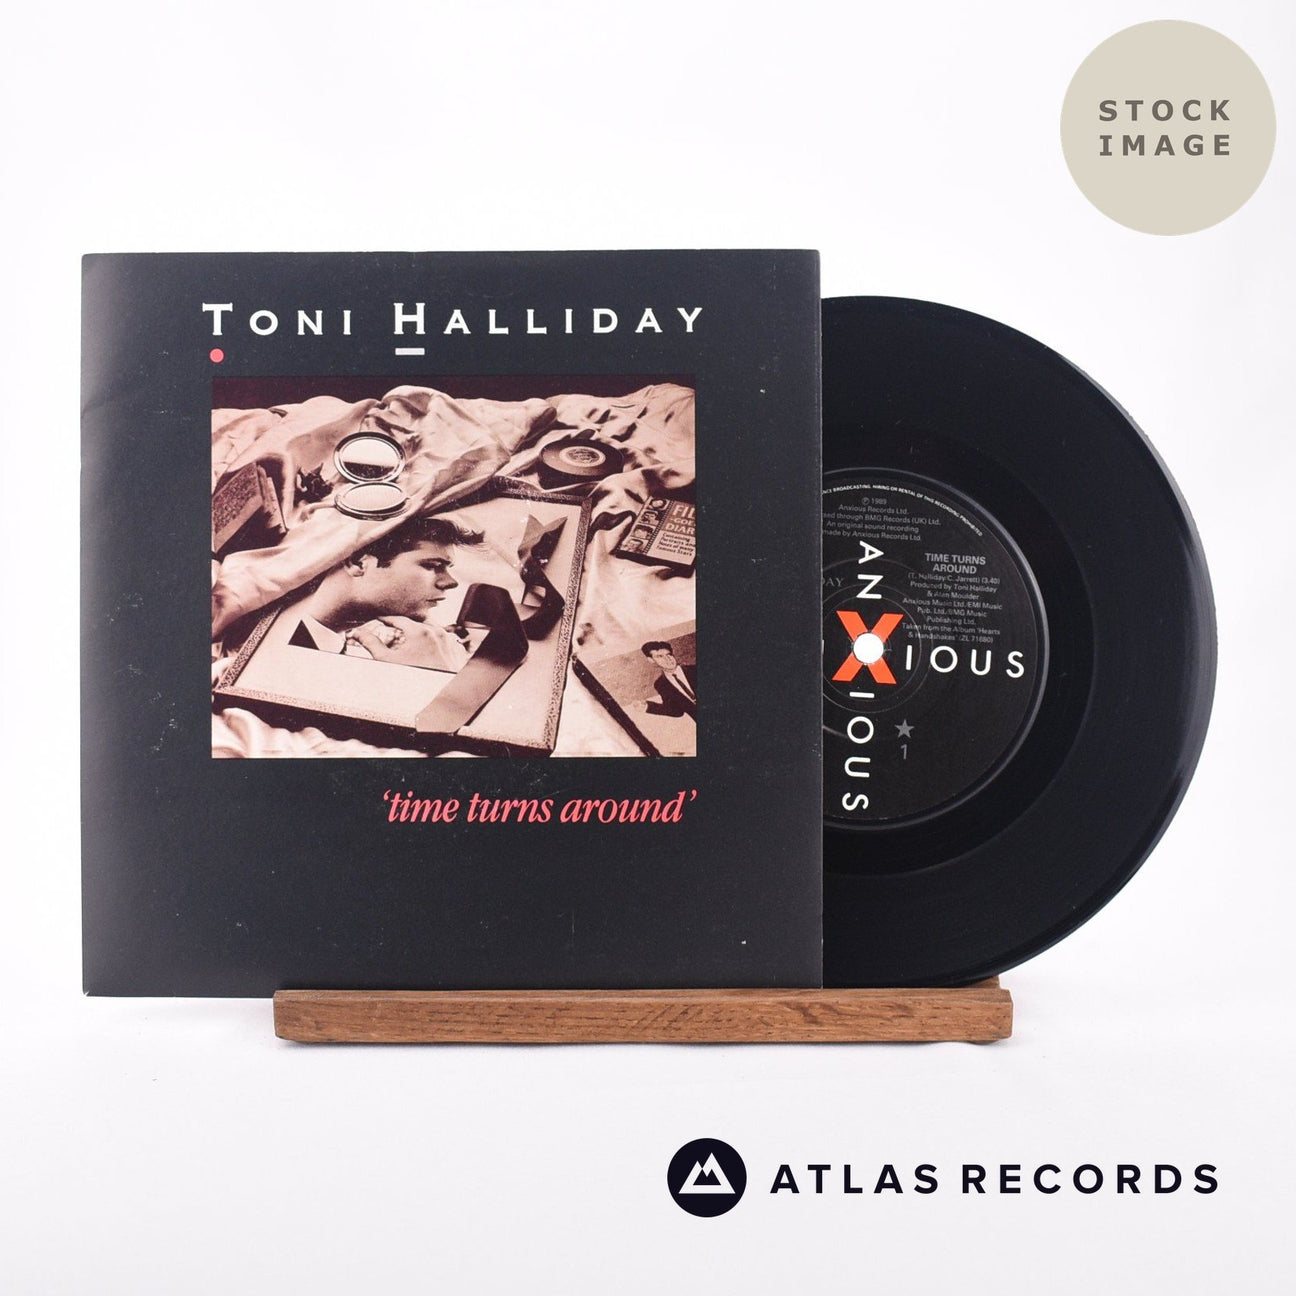 Toni Halliday Time Turns Around 7" Vinyl Record - Sleeve & Record Side-By-Side